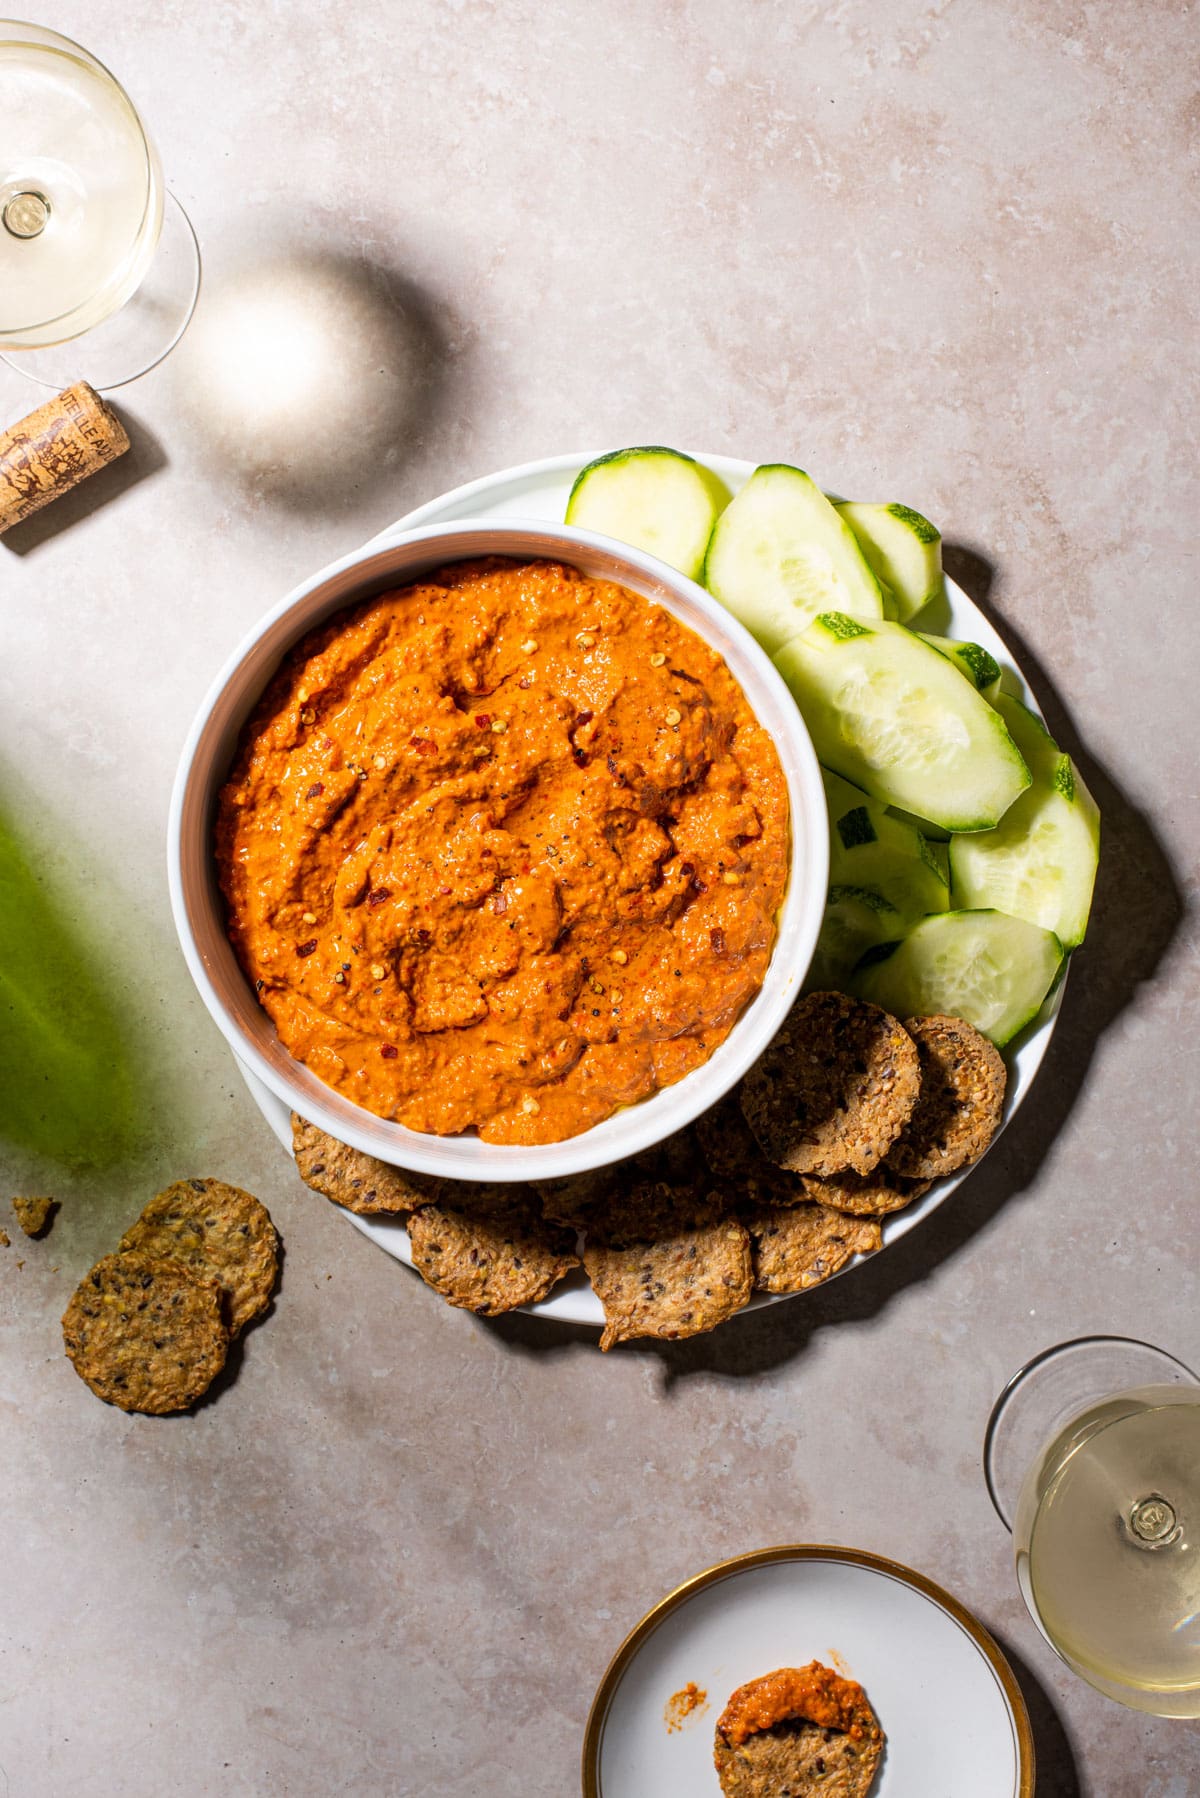 Muhammara dip in a white bowl next to cucumbers, crackers, and wine glasses.